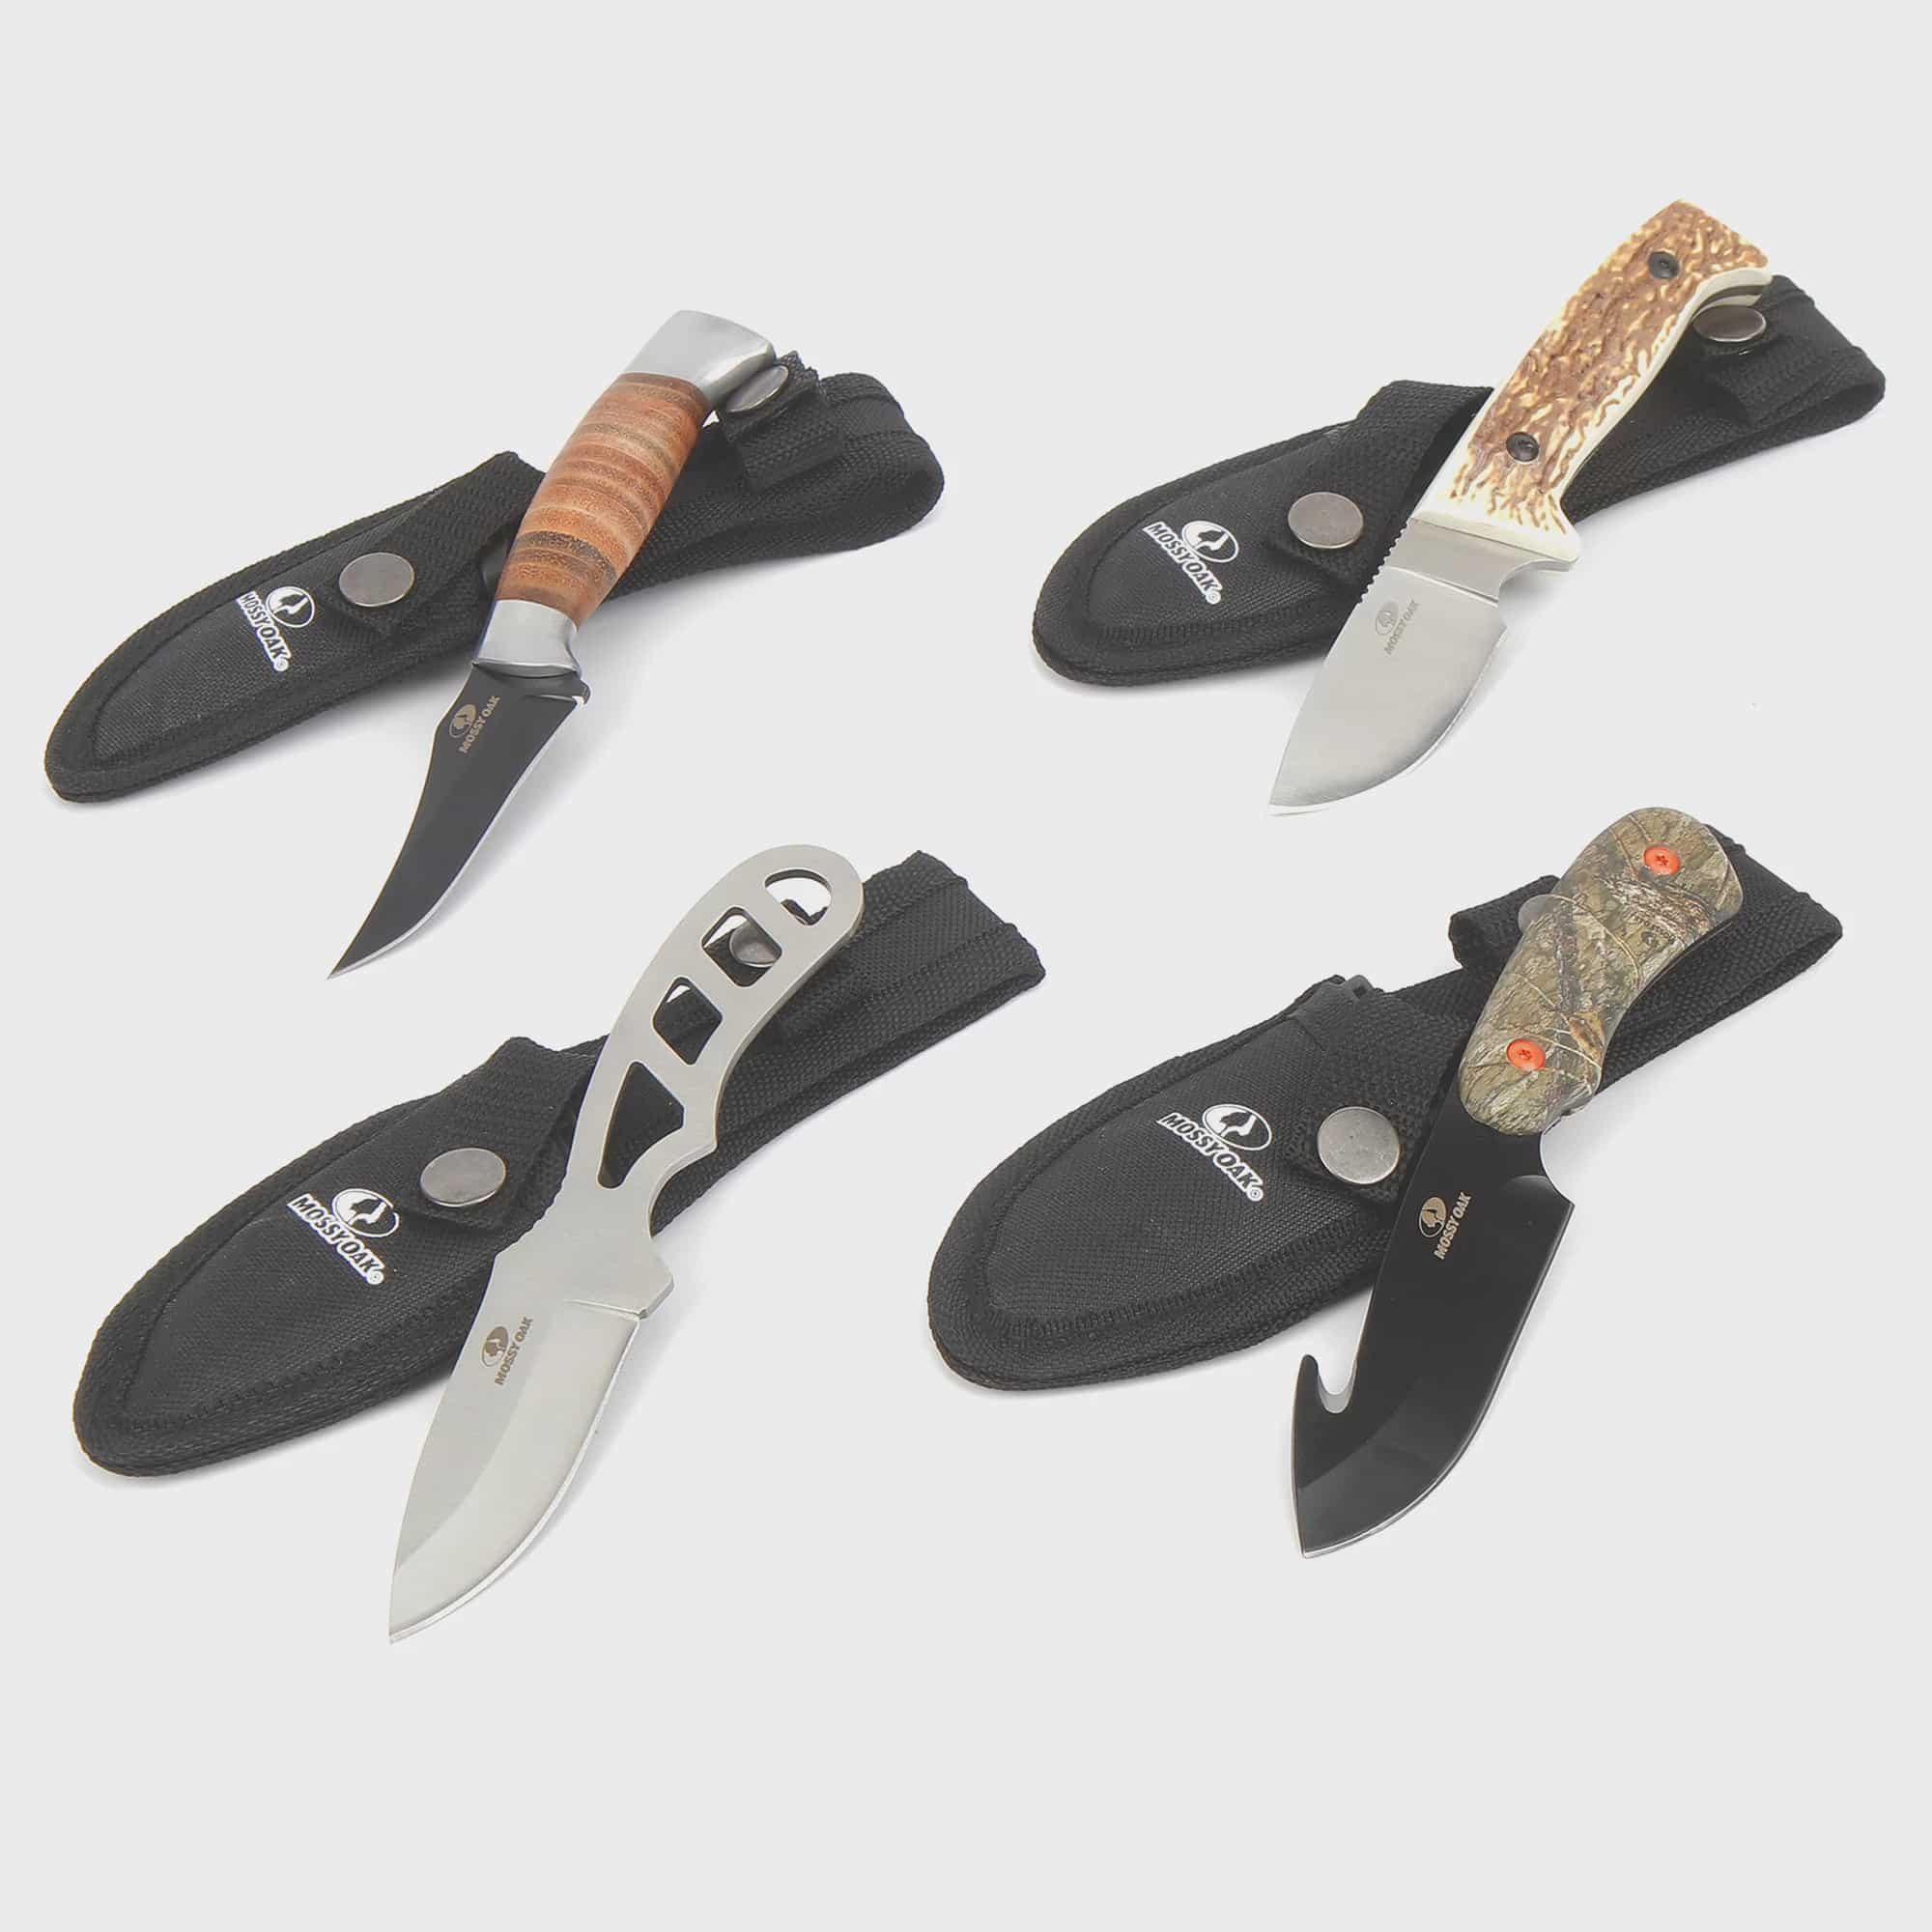 What Are Tactical Knives